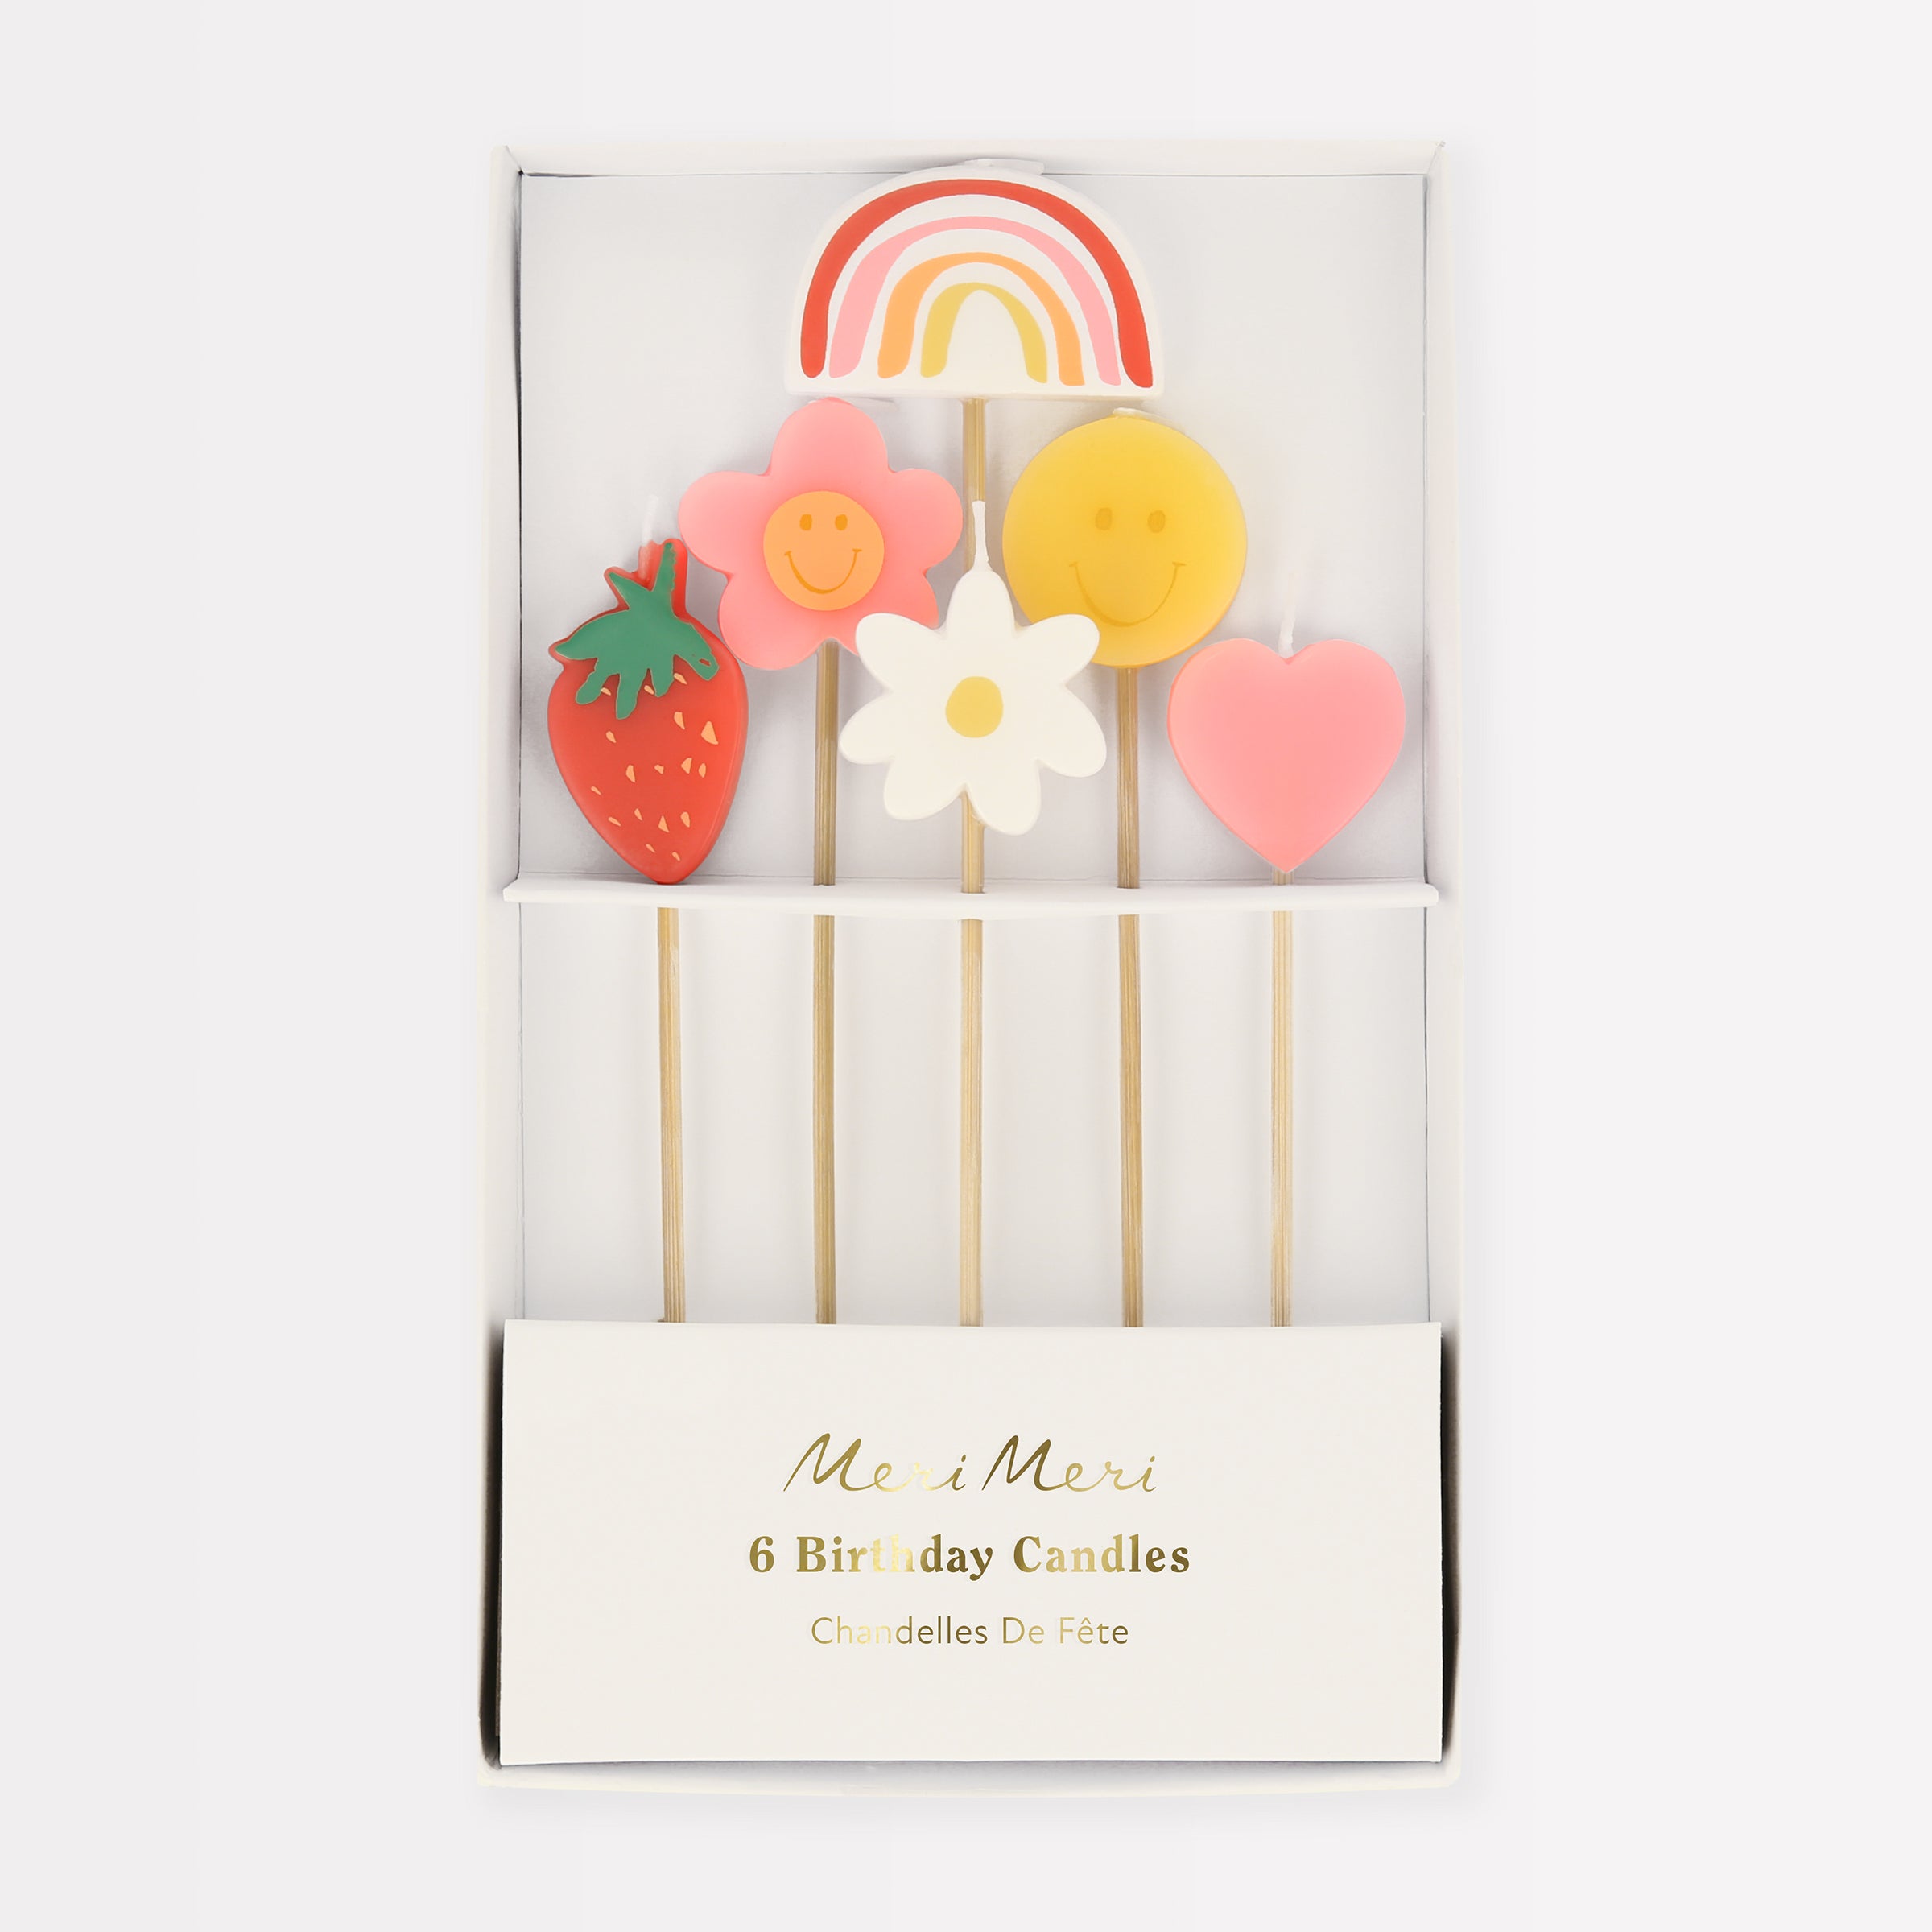 If you're looking for birthday candles in cheerful colors you'll love our happy face collection.